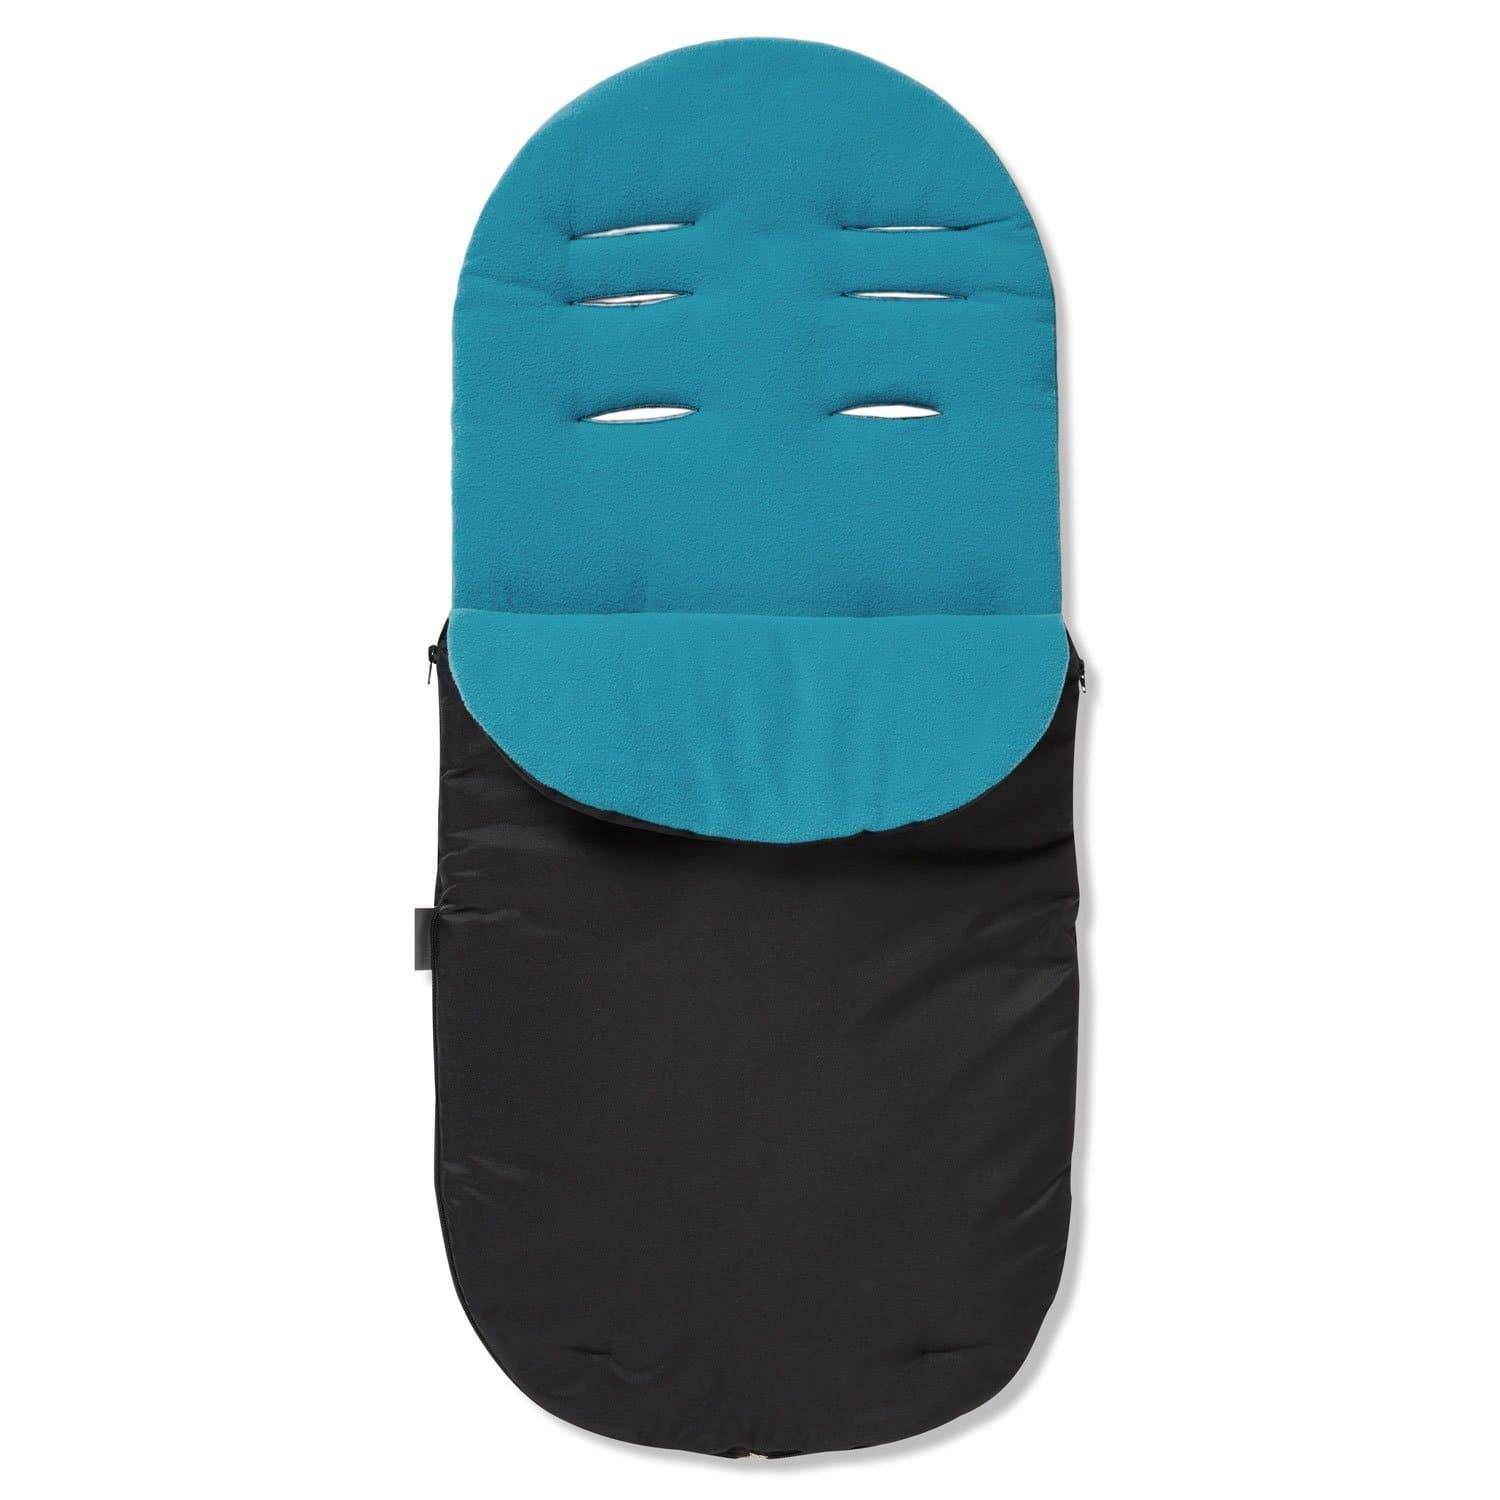 Footmuff / Cosy Toes Compatible with Unilove - Turquoise / Fits All Models | For Your Little One